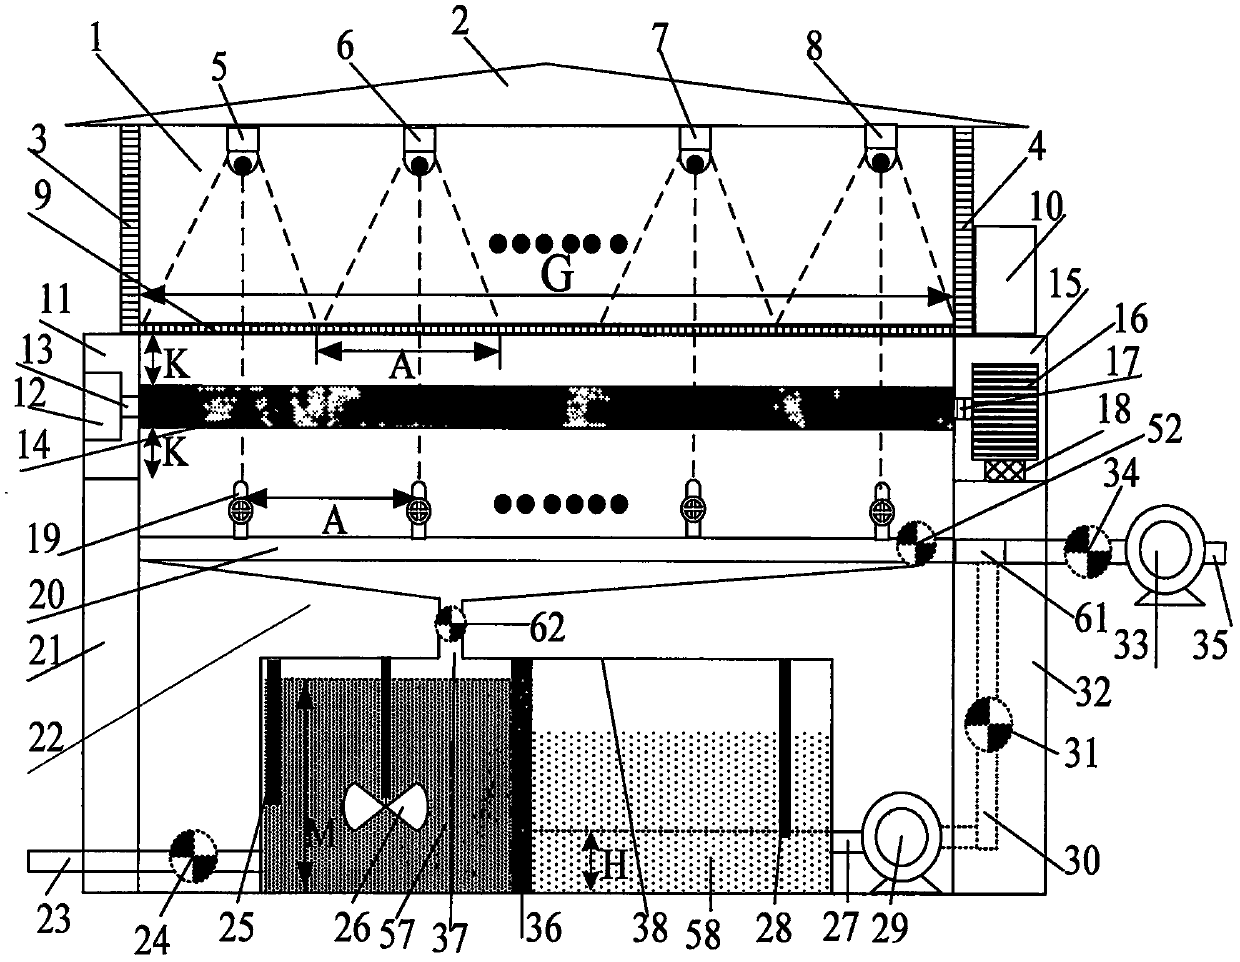 Poultry house excrement automatic cleaning device and method based on image recognition